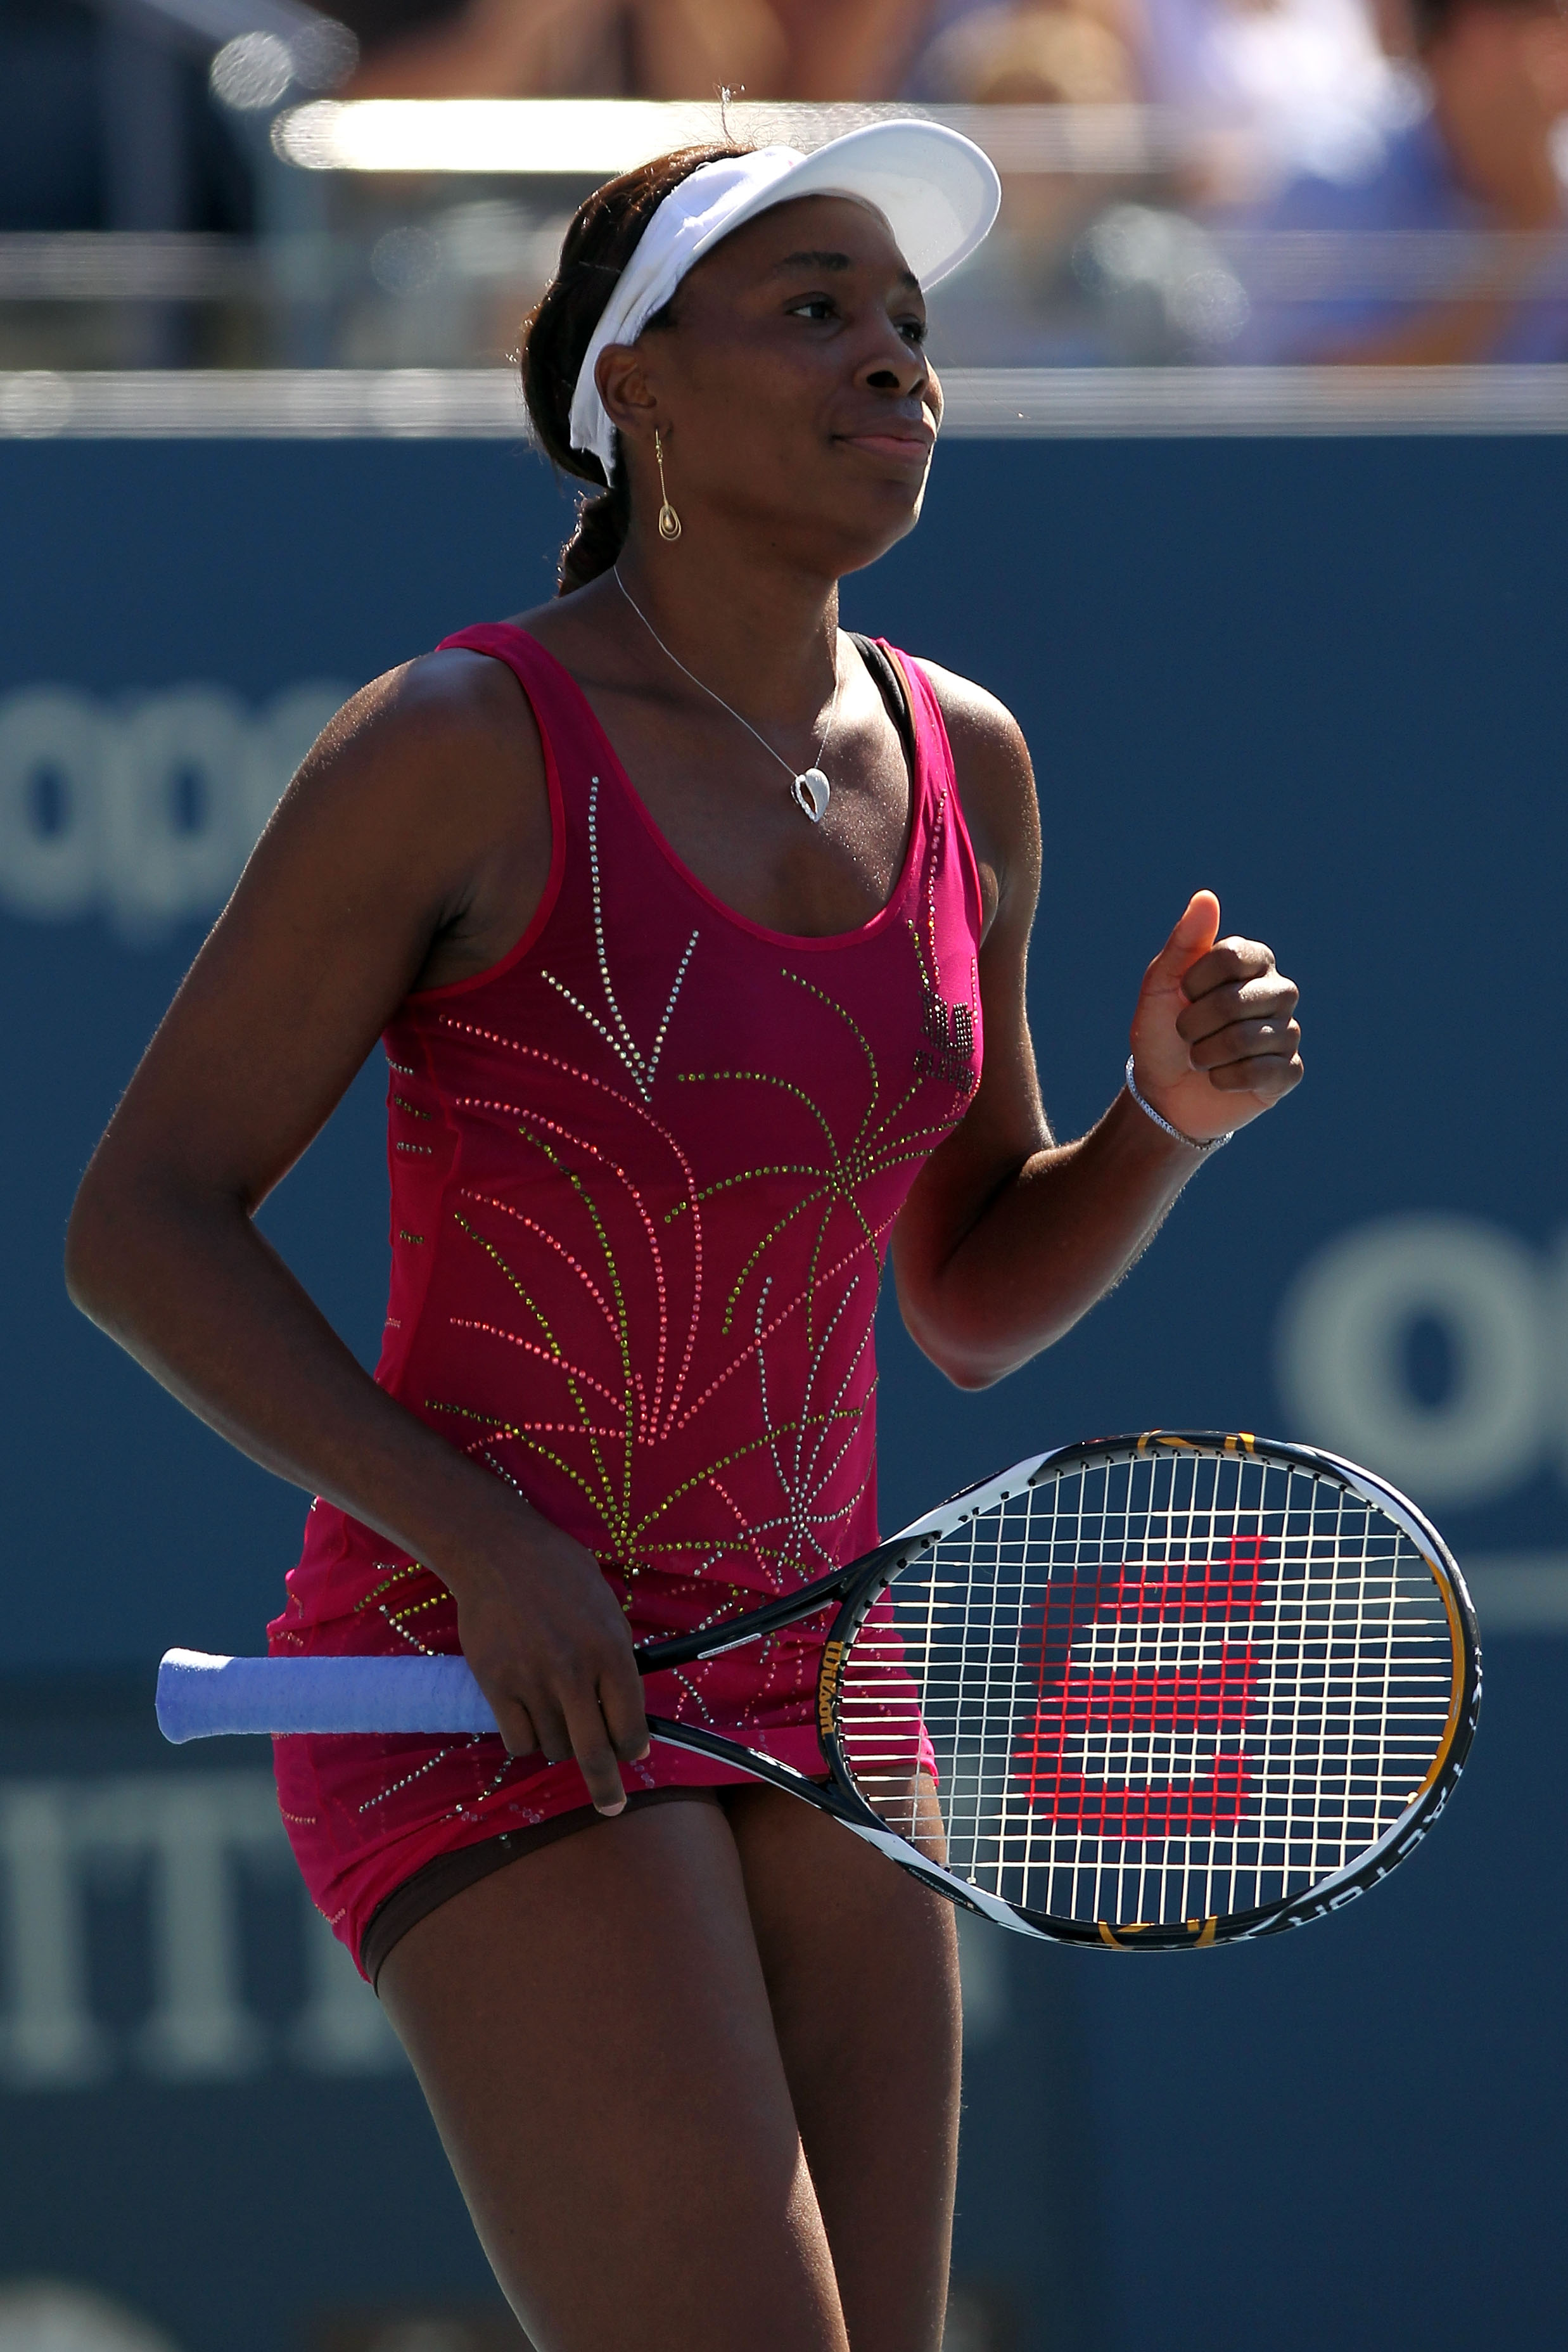 Venus Williams French Open Outfit Was Her Us Open Outfit Wilder